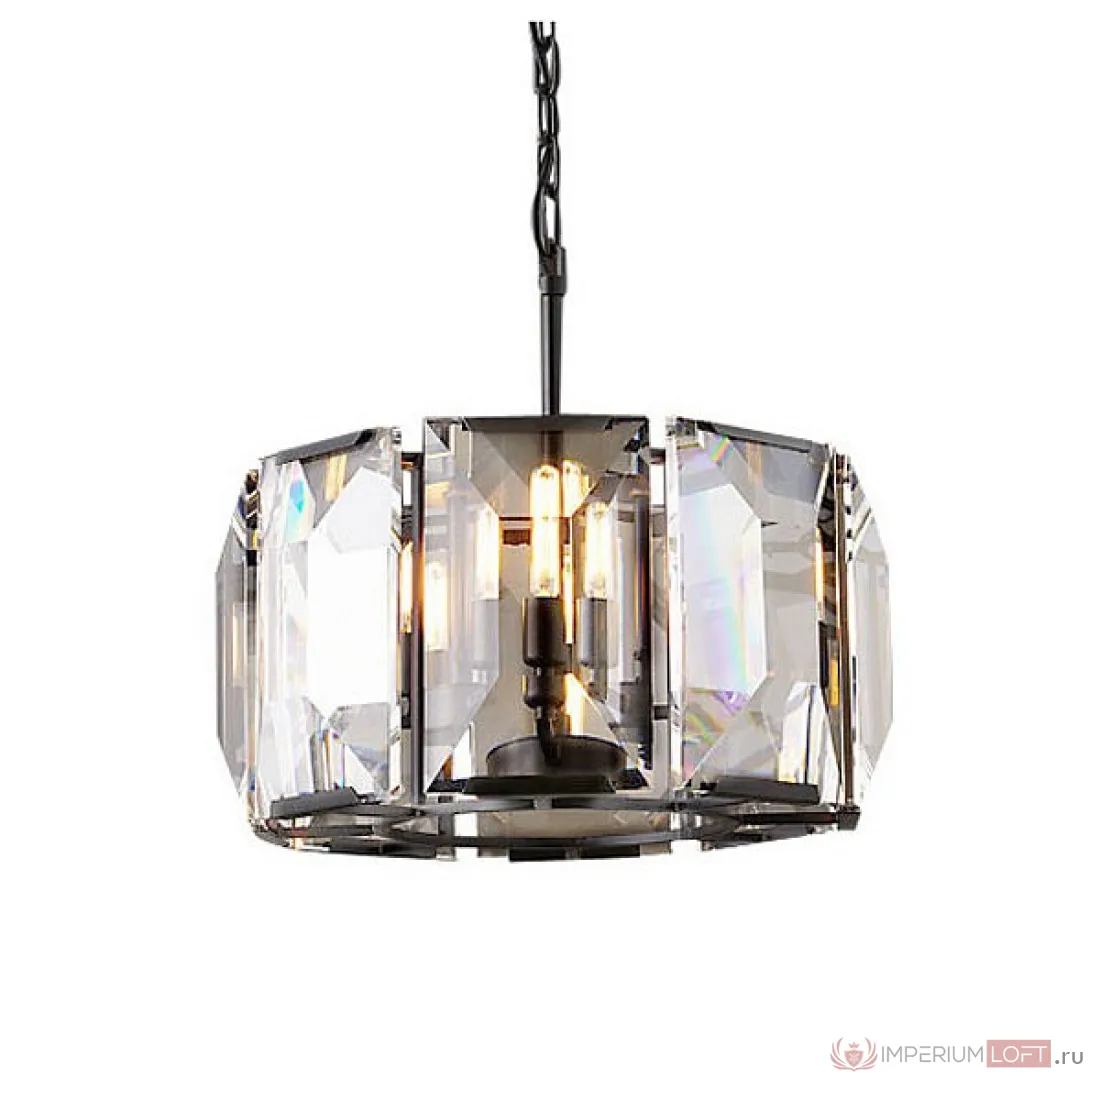 Светильники delight collection. Люстра Delight collection Spencer kr0277p-5l Chrome. Люстра Delight 3. Люстра rh Harlow Crystal Square Chandelier 16. Подвесной светильник Delight collection p0059-1a Black.